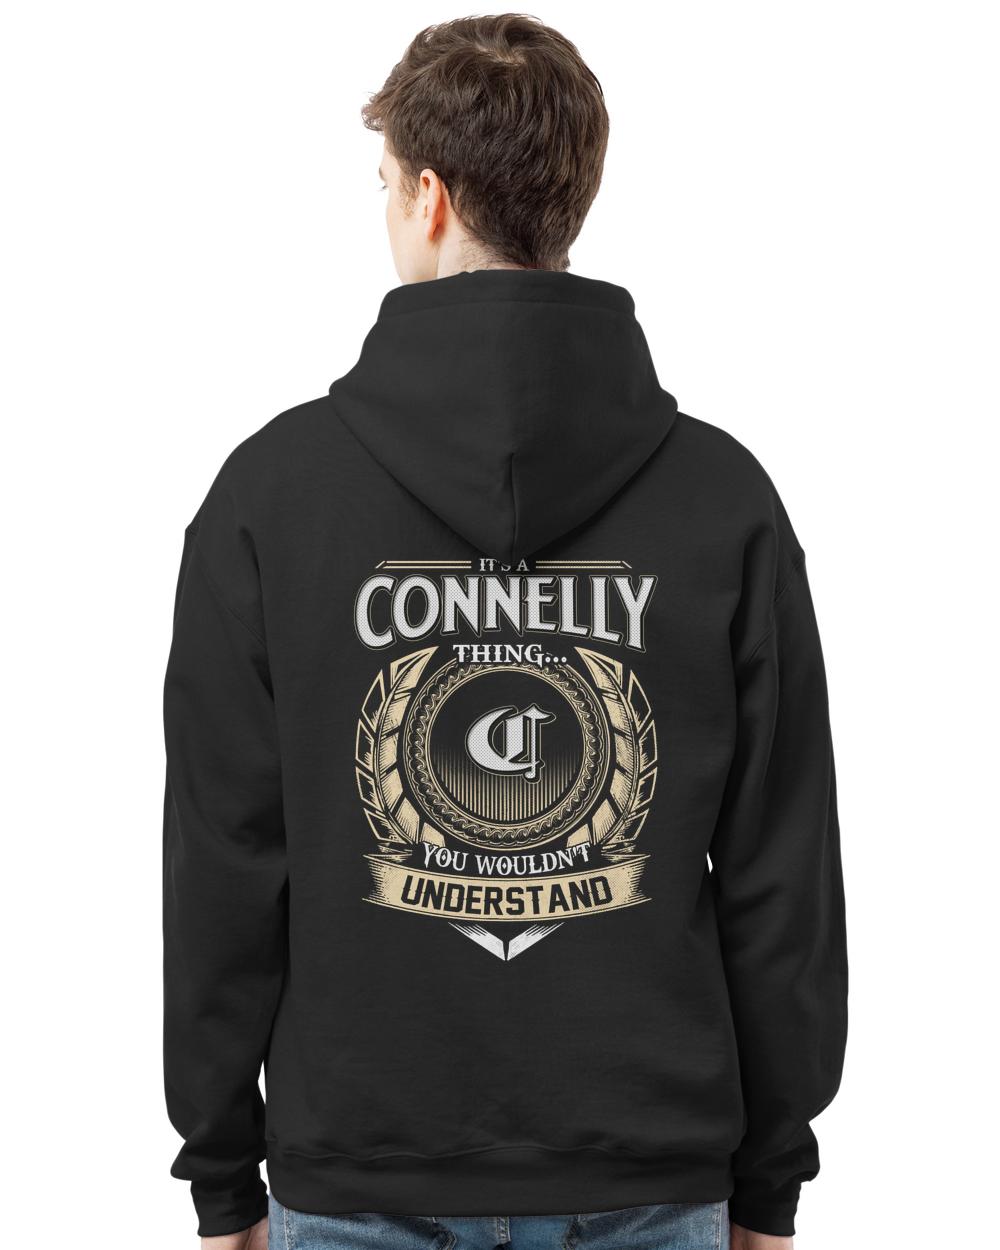 CONNELLY-13K-46-01